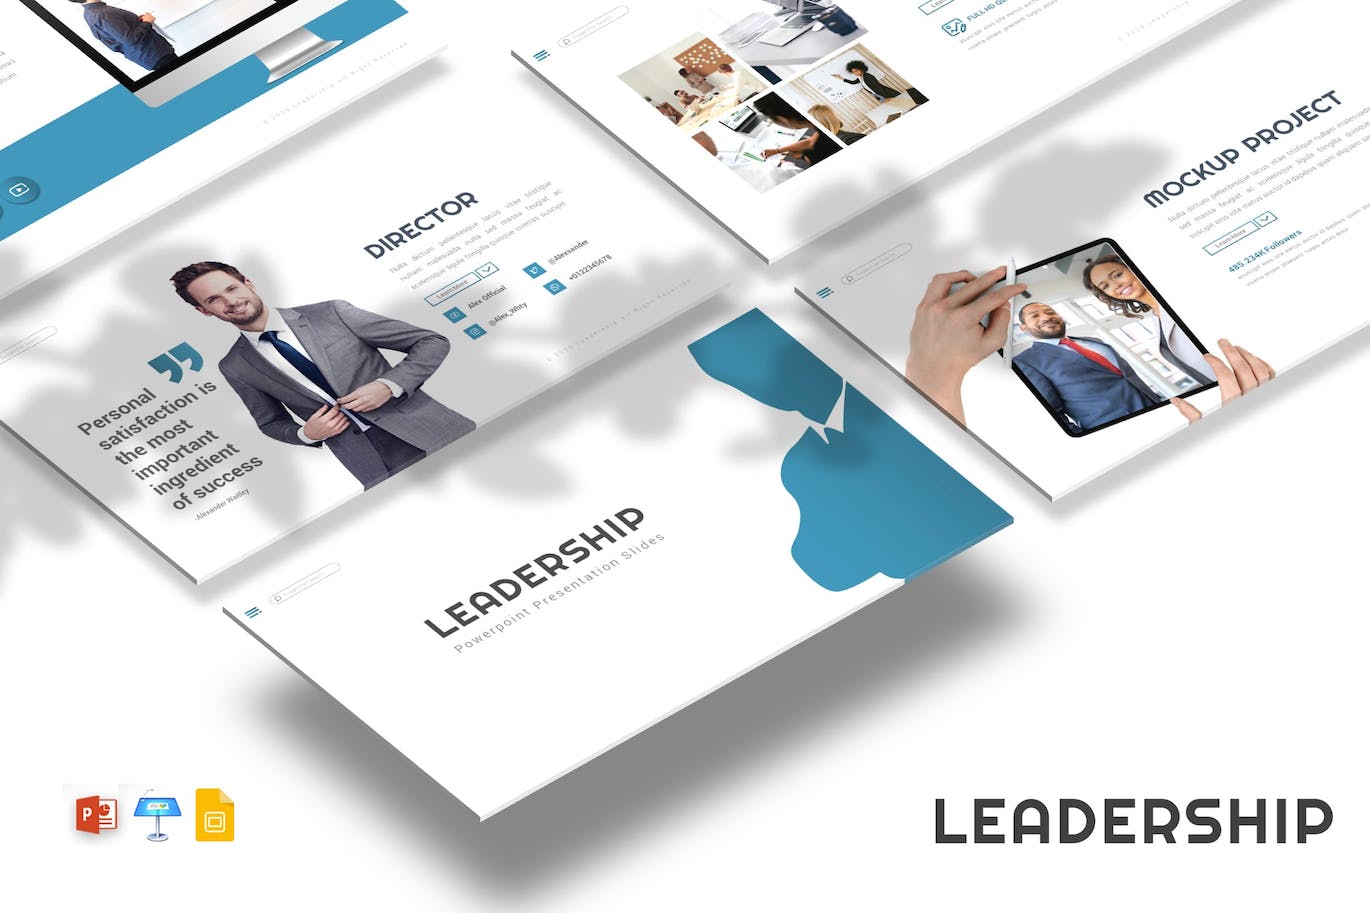 Bundle of images of exquisite presentation template slides on the theme of leadership.